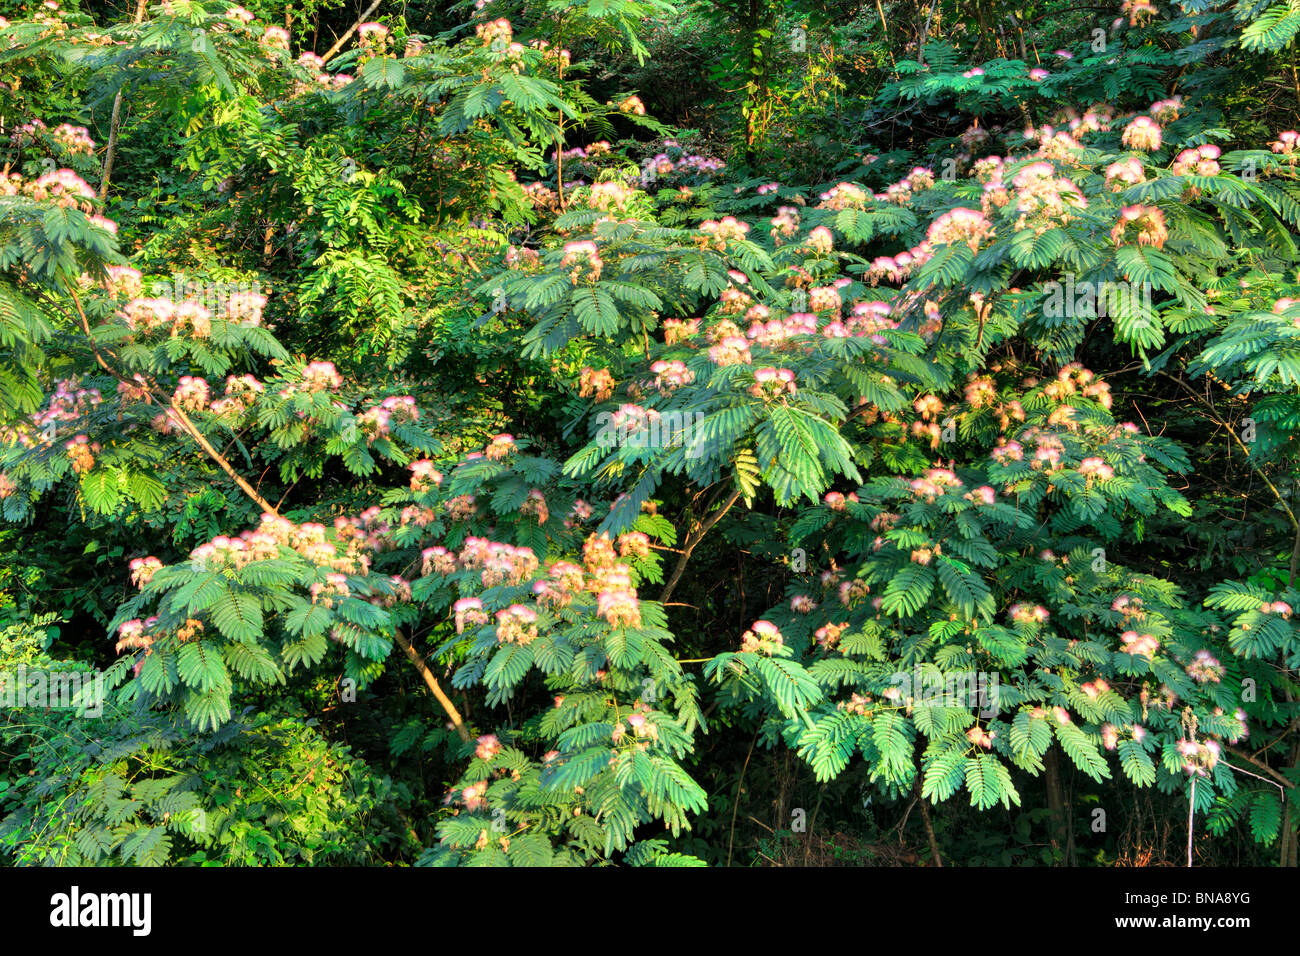 Mimosa Tree in Bloom, albizia julibrissin, Great Smoky Mountains National Park, USA Stock Photo